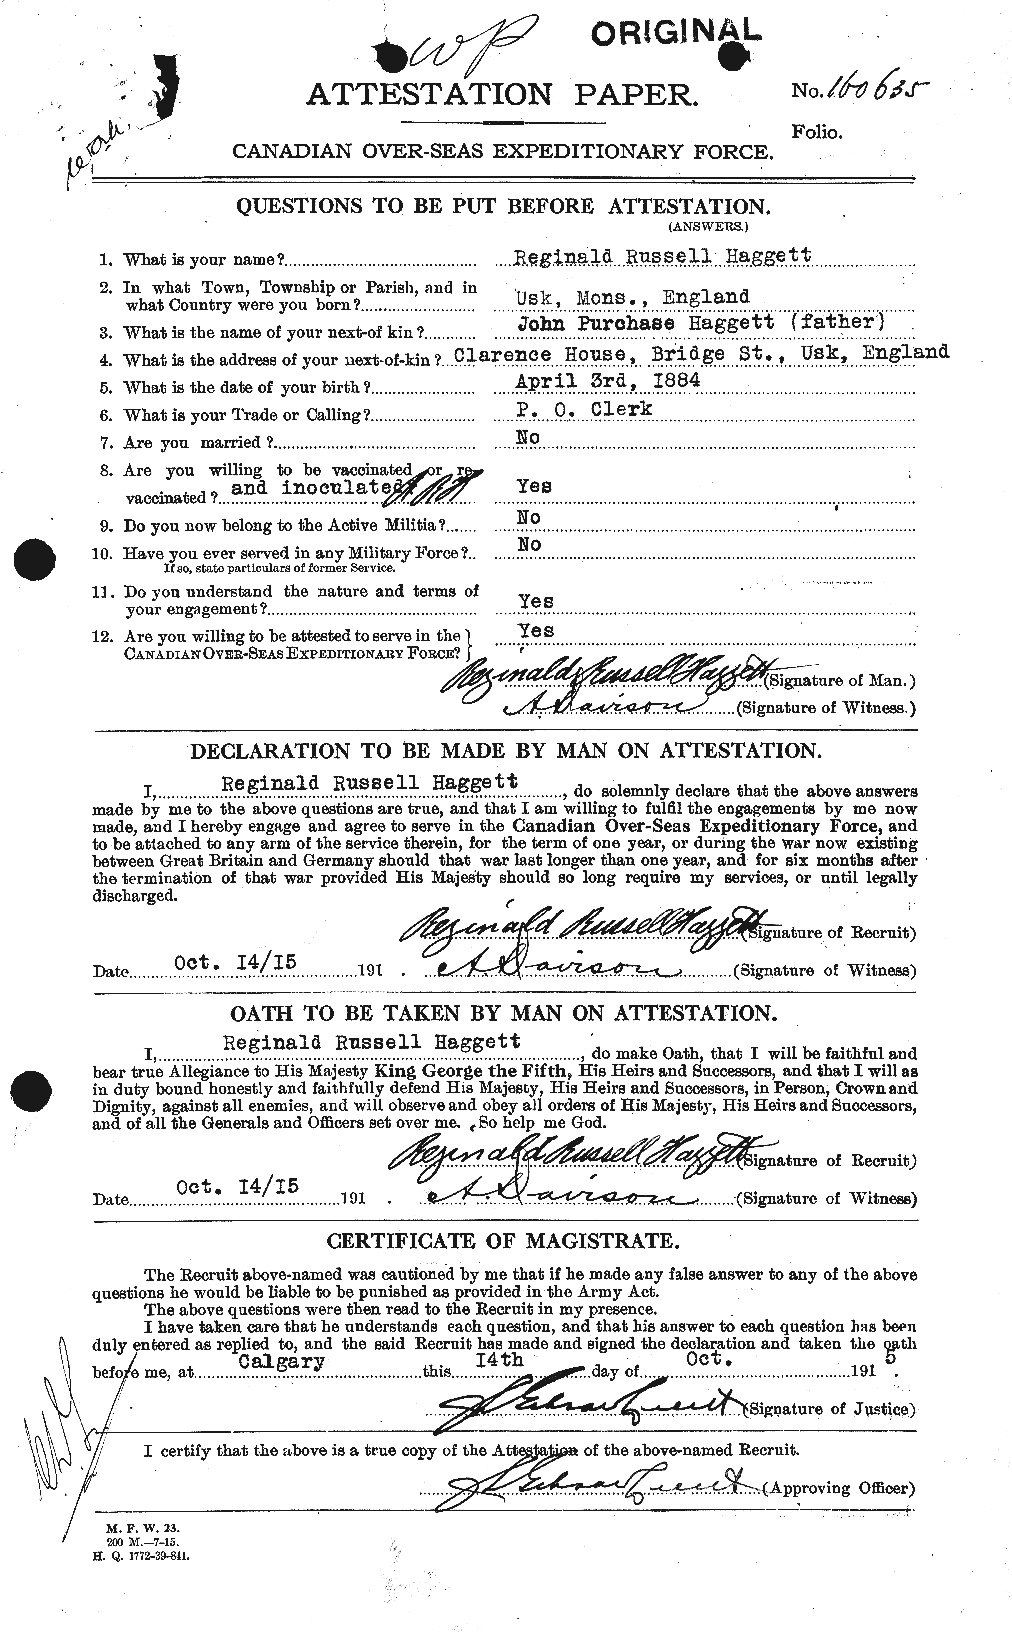 Personnel Records of the First World War - CEF 366707a